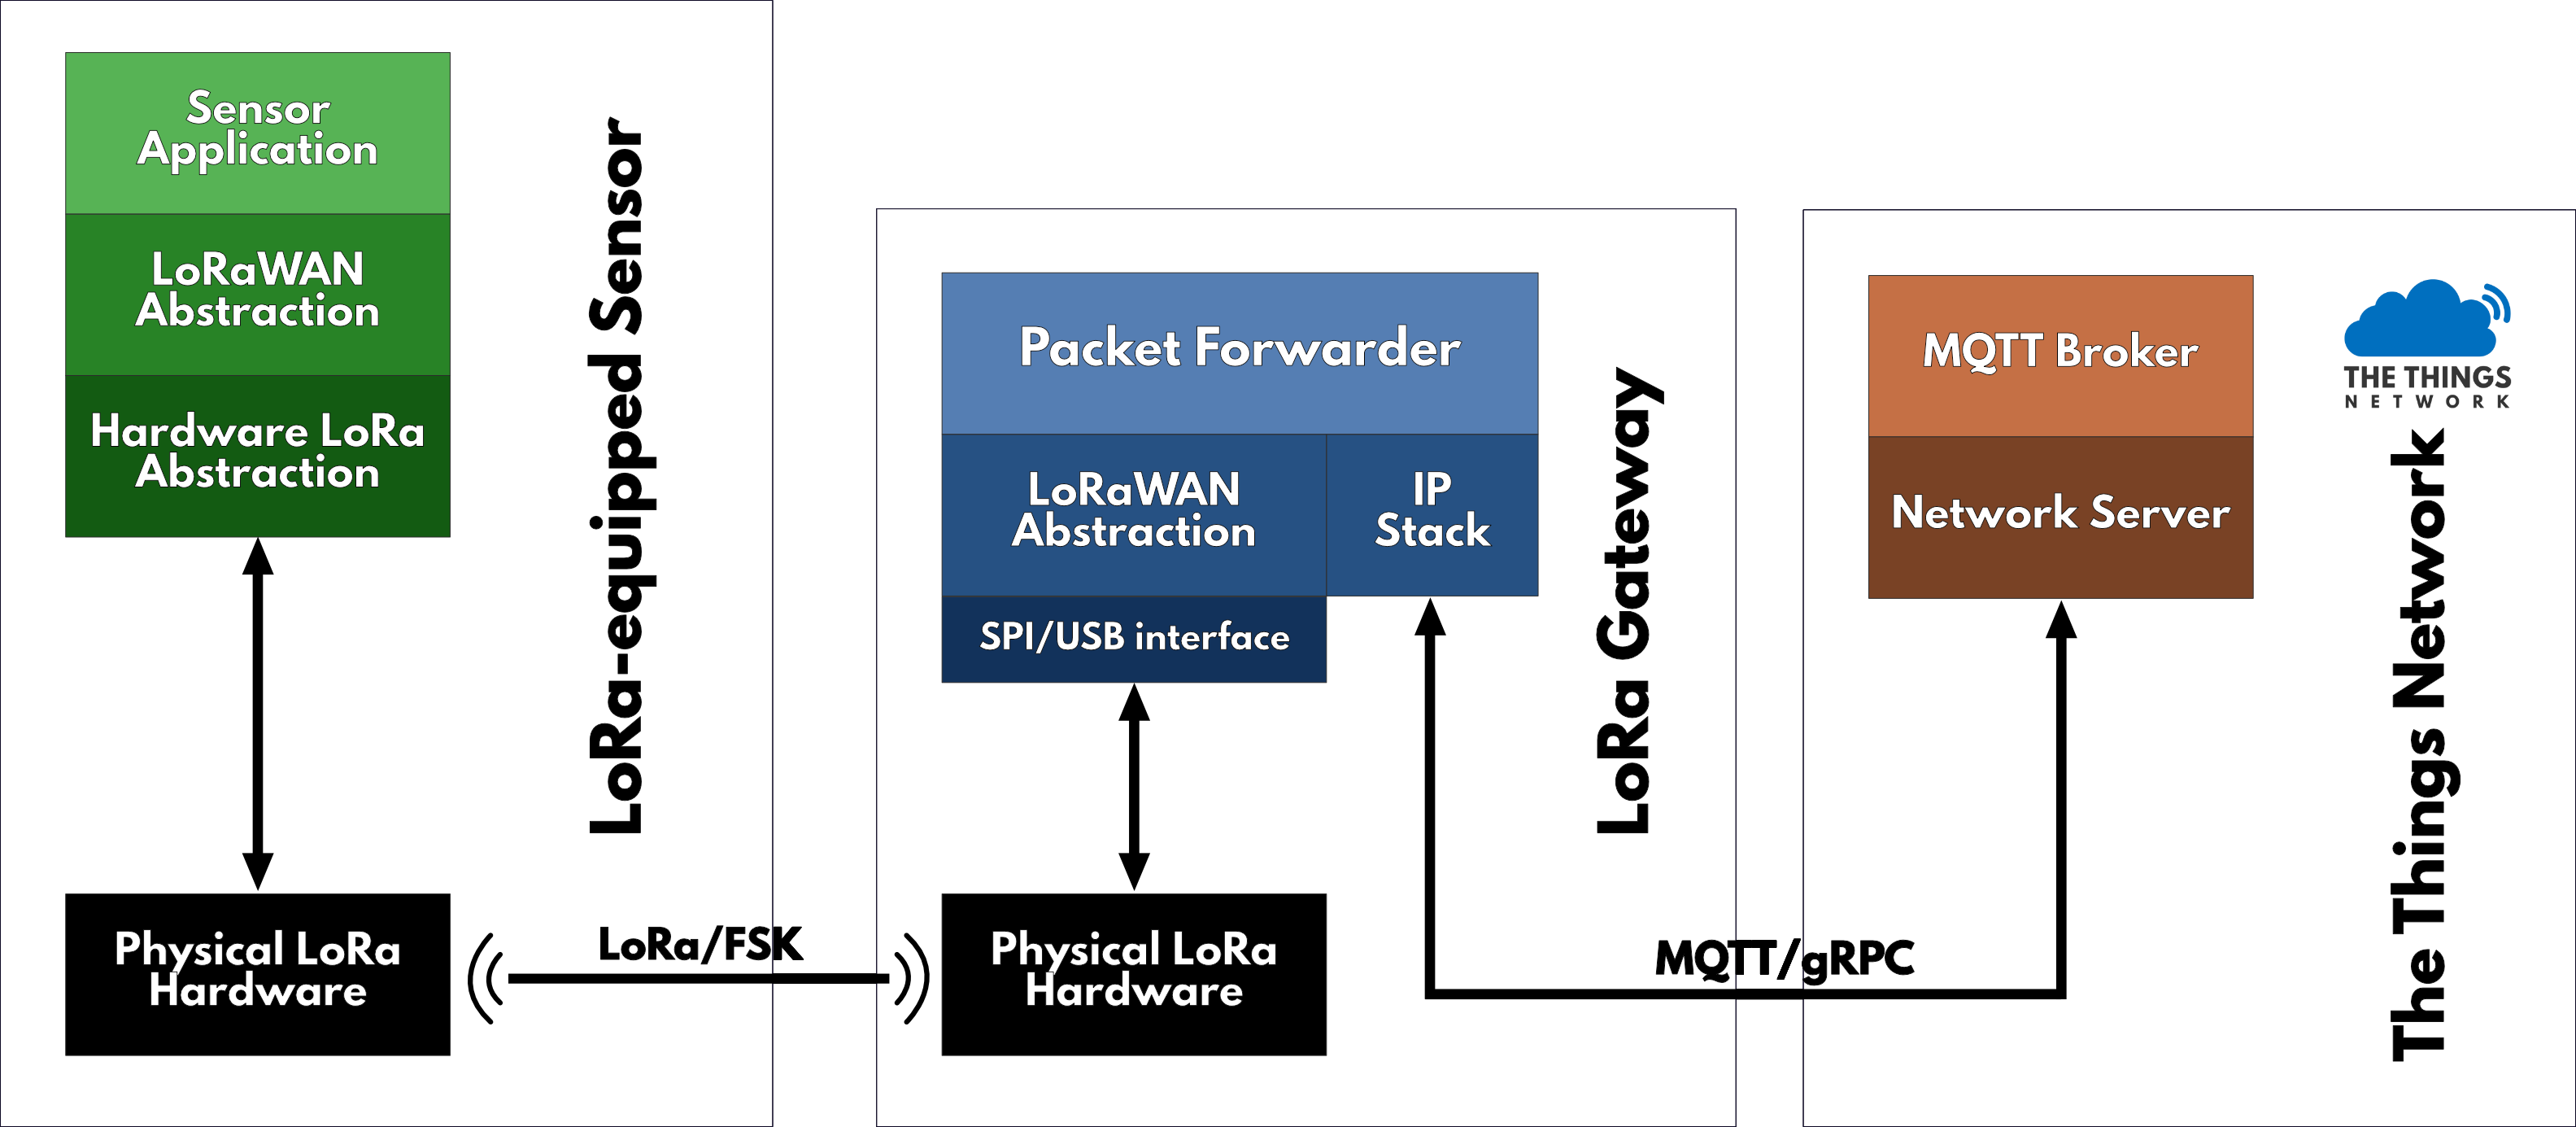 Packet forwarder